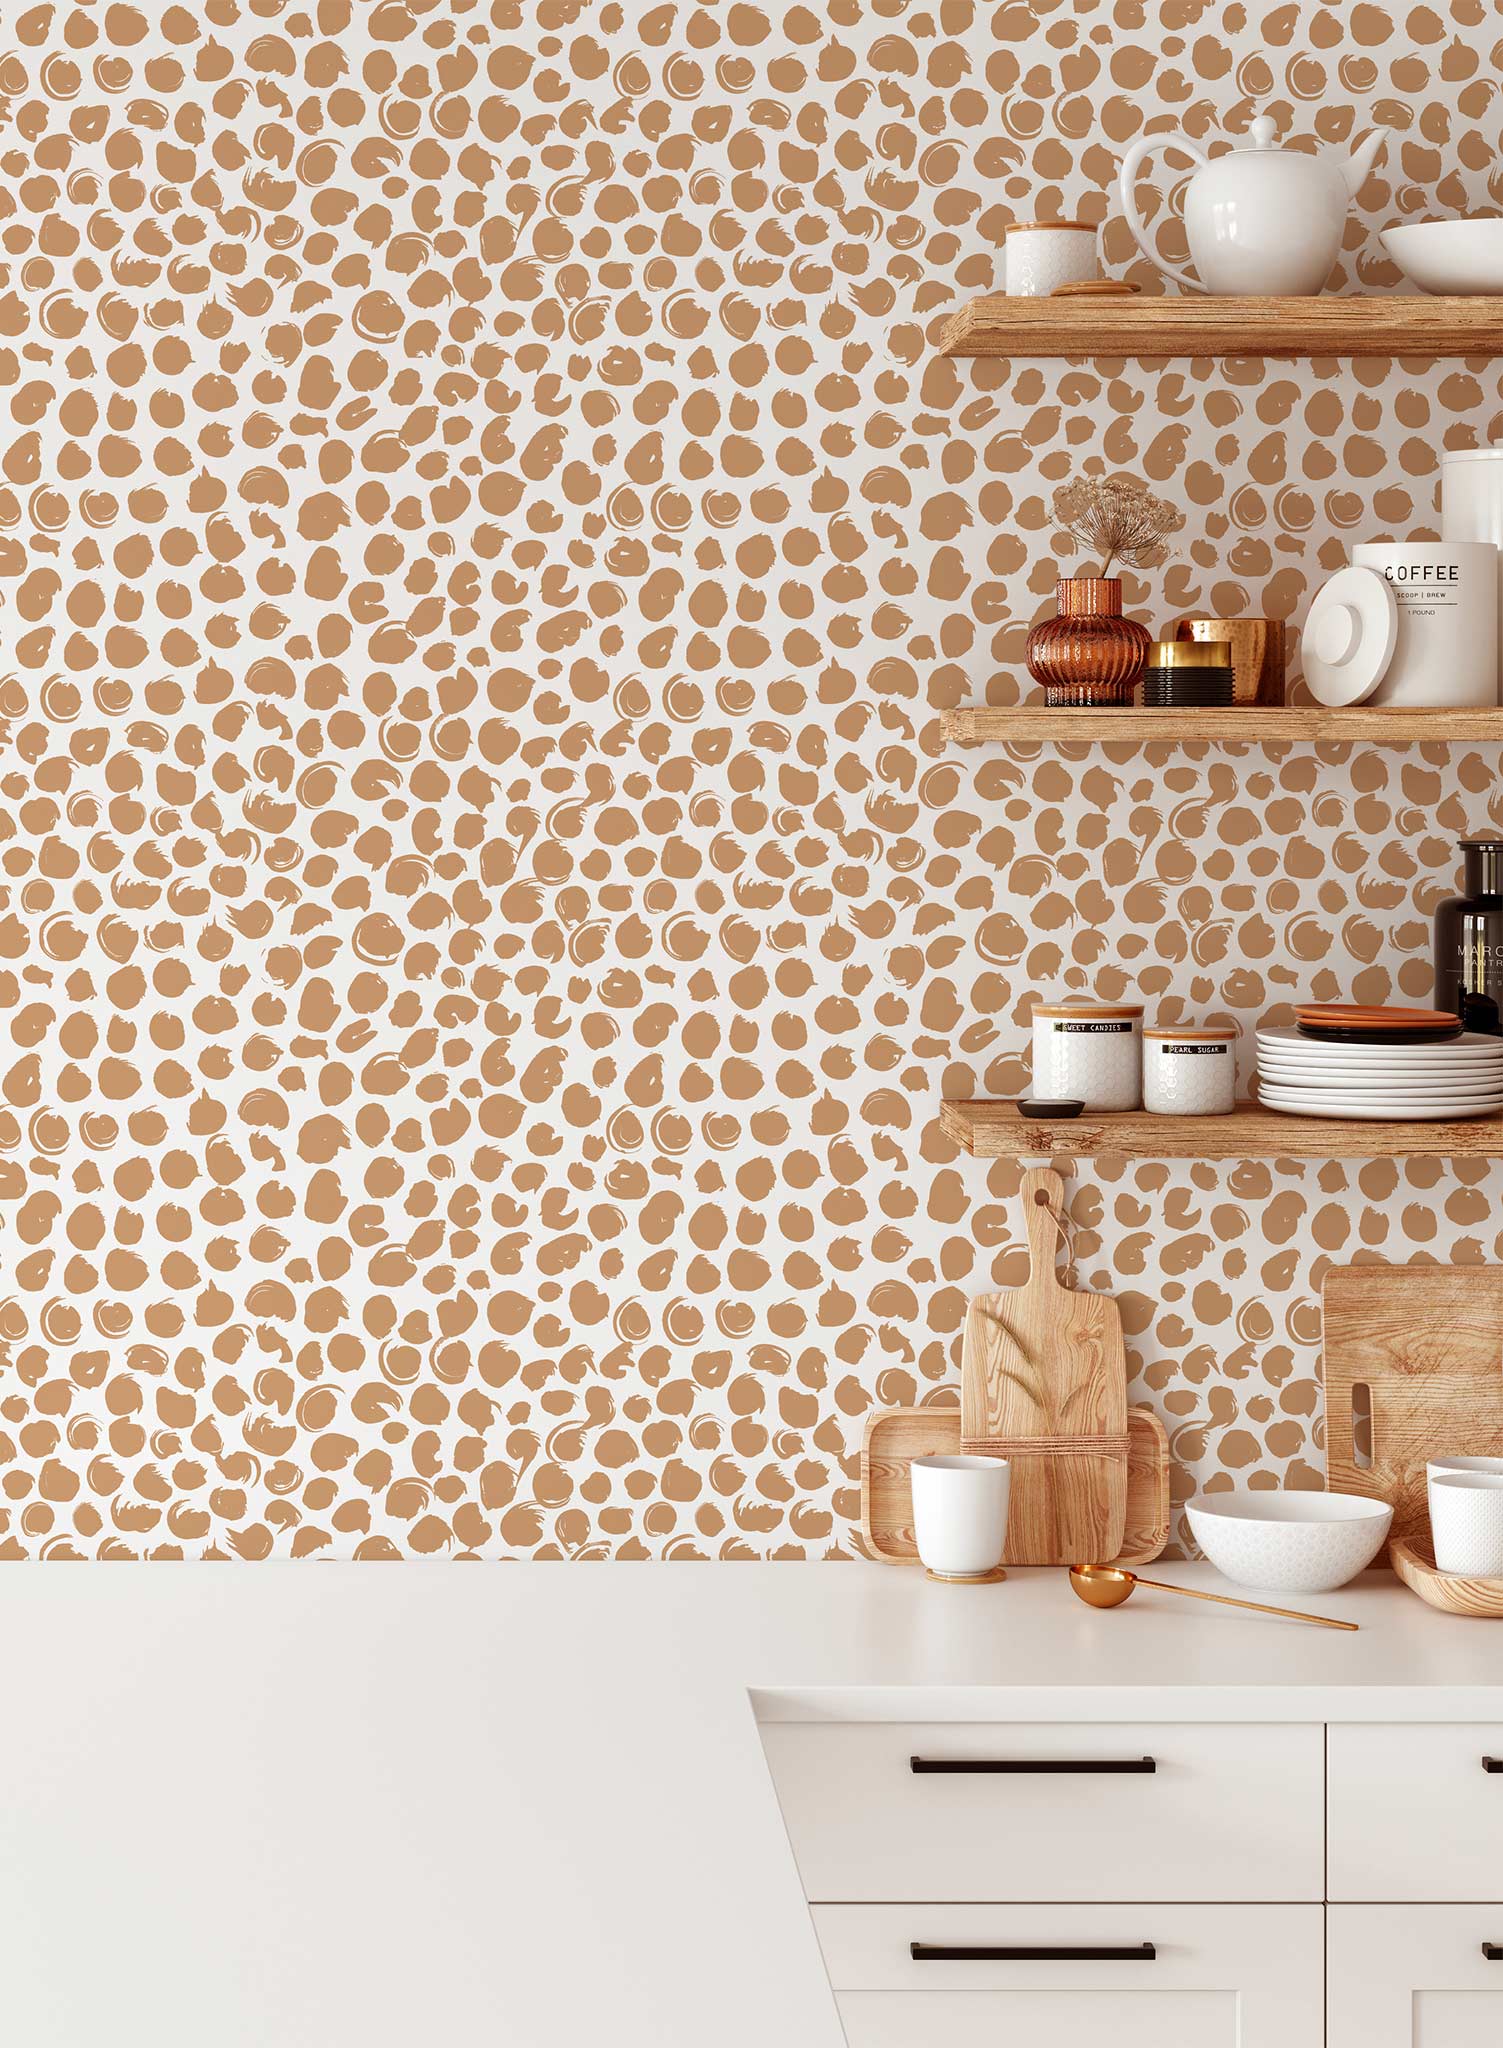 On the Dot is a minimalist wallpaper by Opposite Wall of imperfect dots of different sizes and looks.